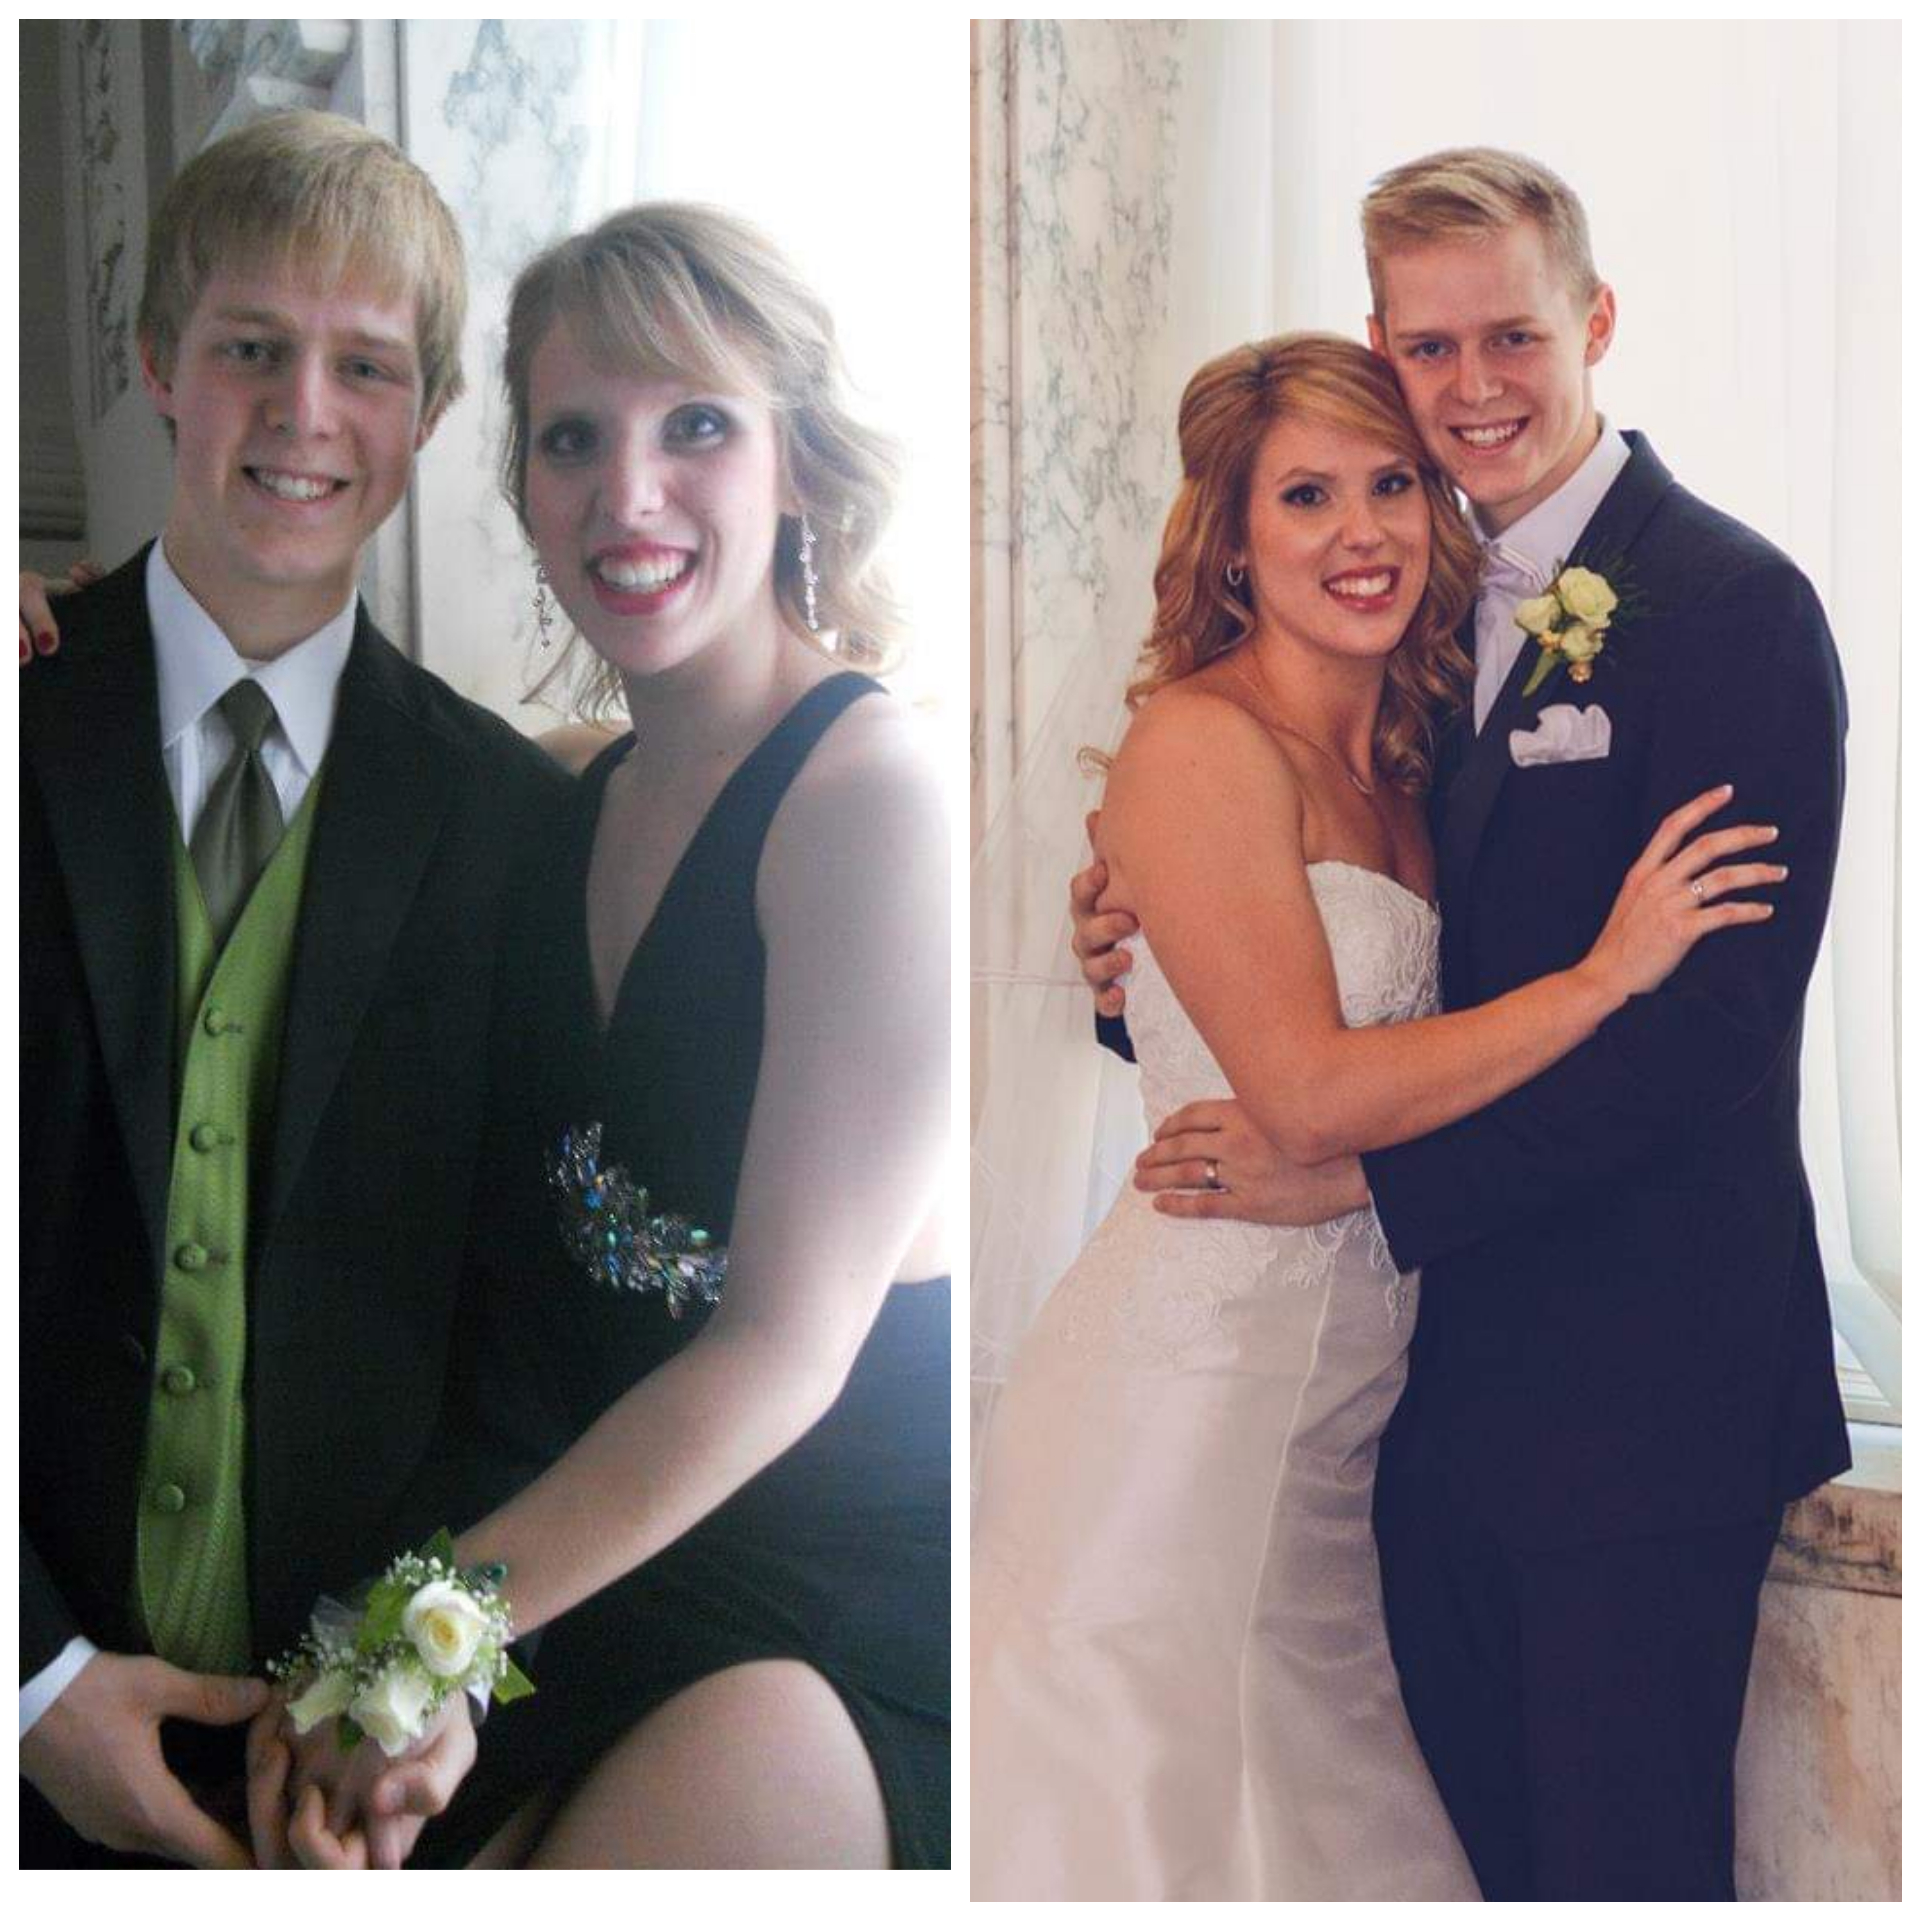 young couple at prom on left, at their wedding on right.